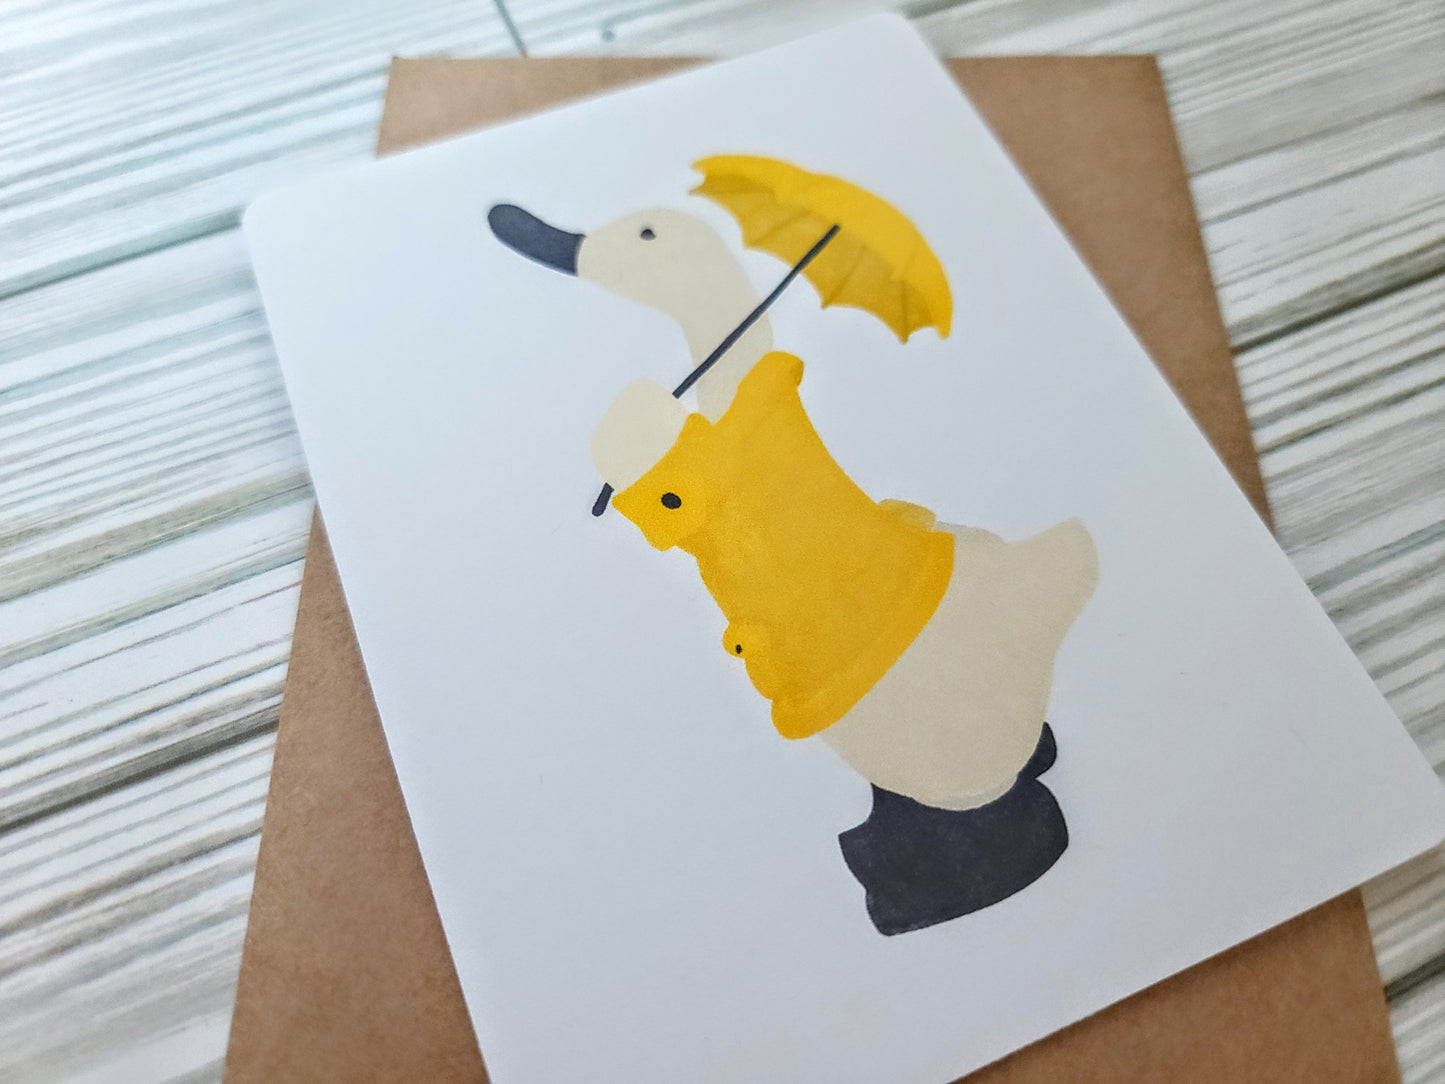 Duck in a Yellow Rainjacket with Umbrella Handmade Greeting Card - Recycled Paper and Kraft Envelope - Angled Overhead Shot